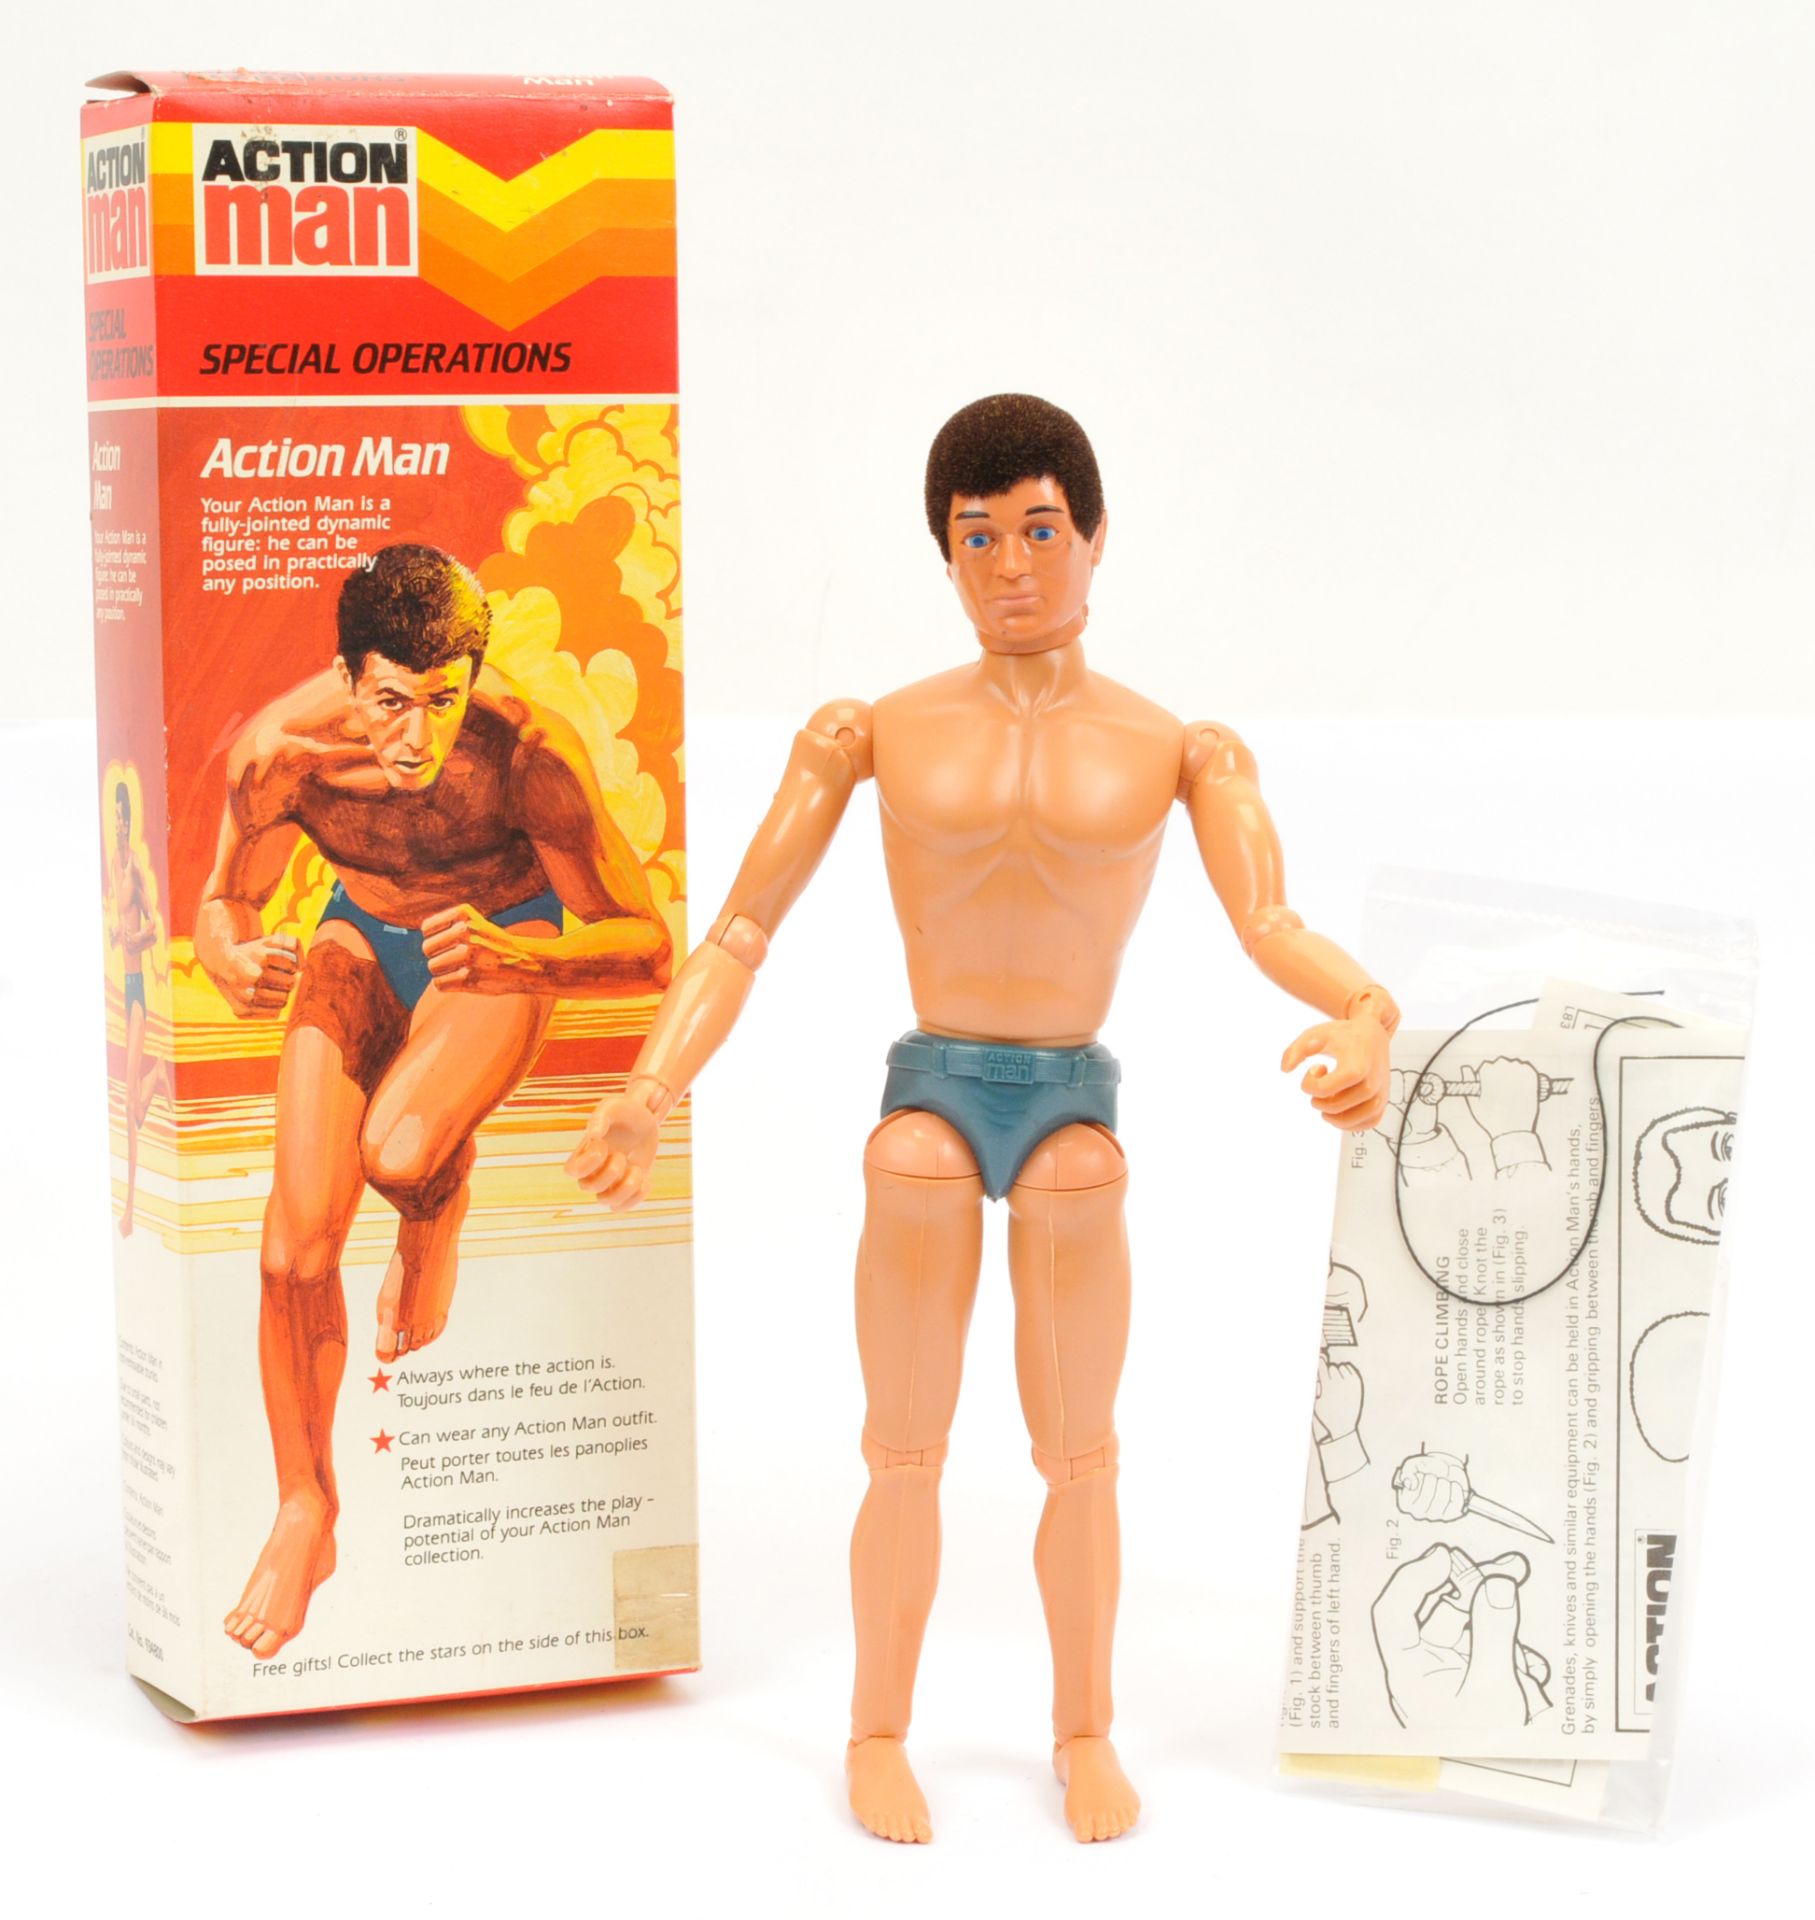 Palitoy Miro-Meccano (Anglo French) Action Man vintage Special Operations figure, Eagle-Eye, head...